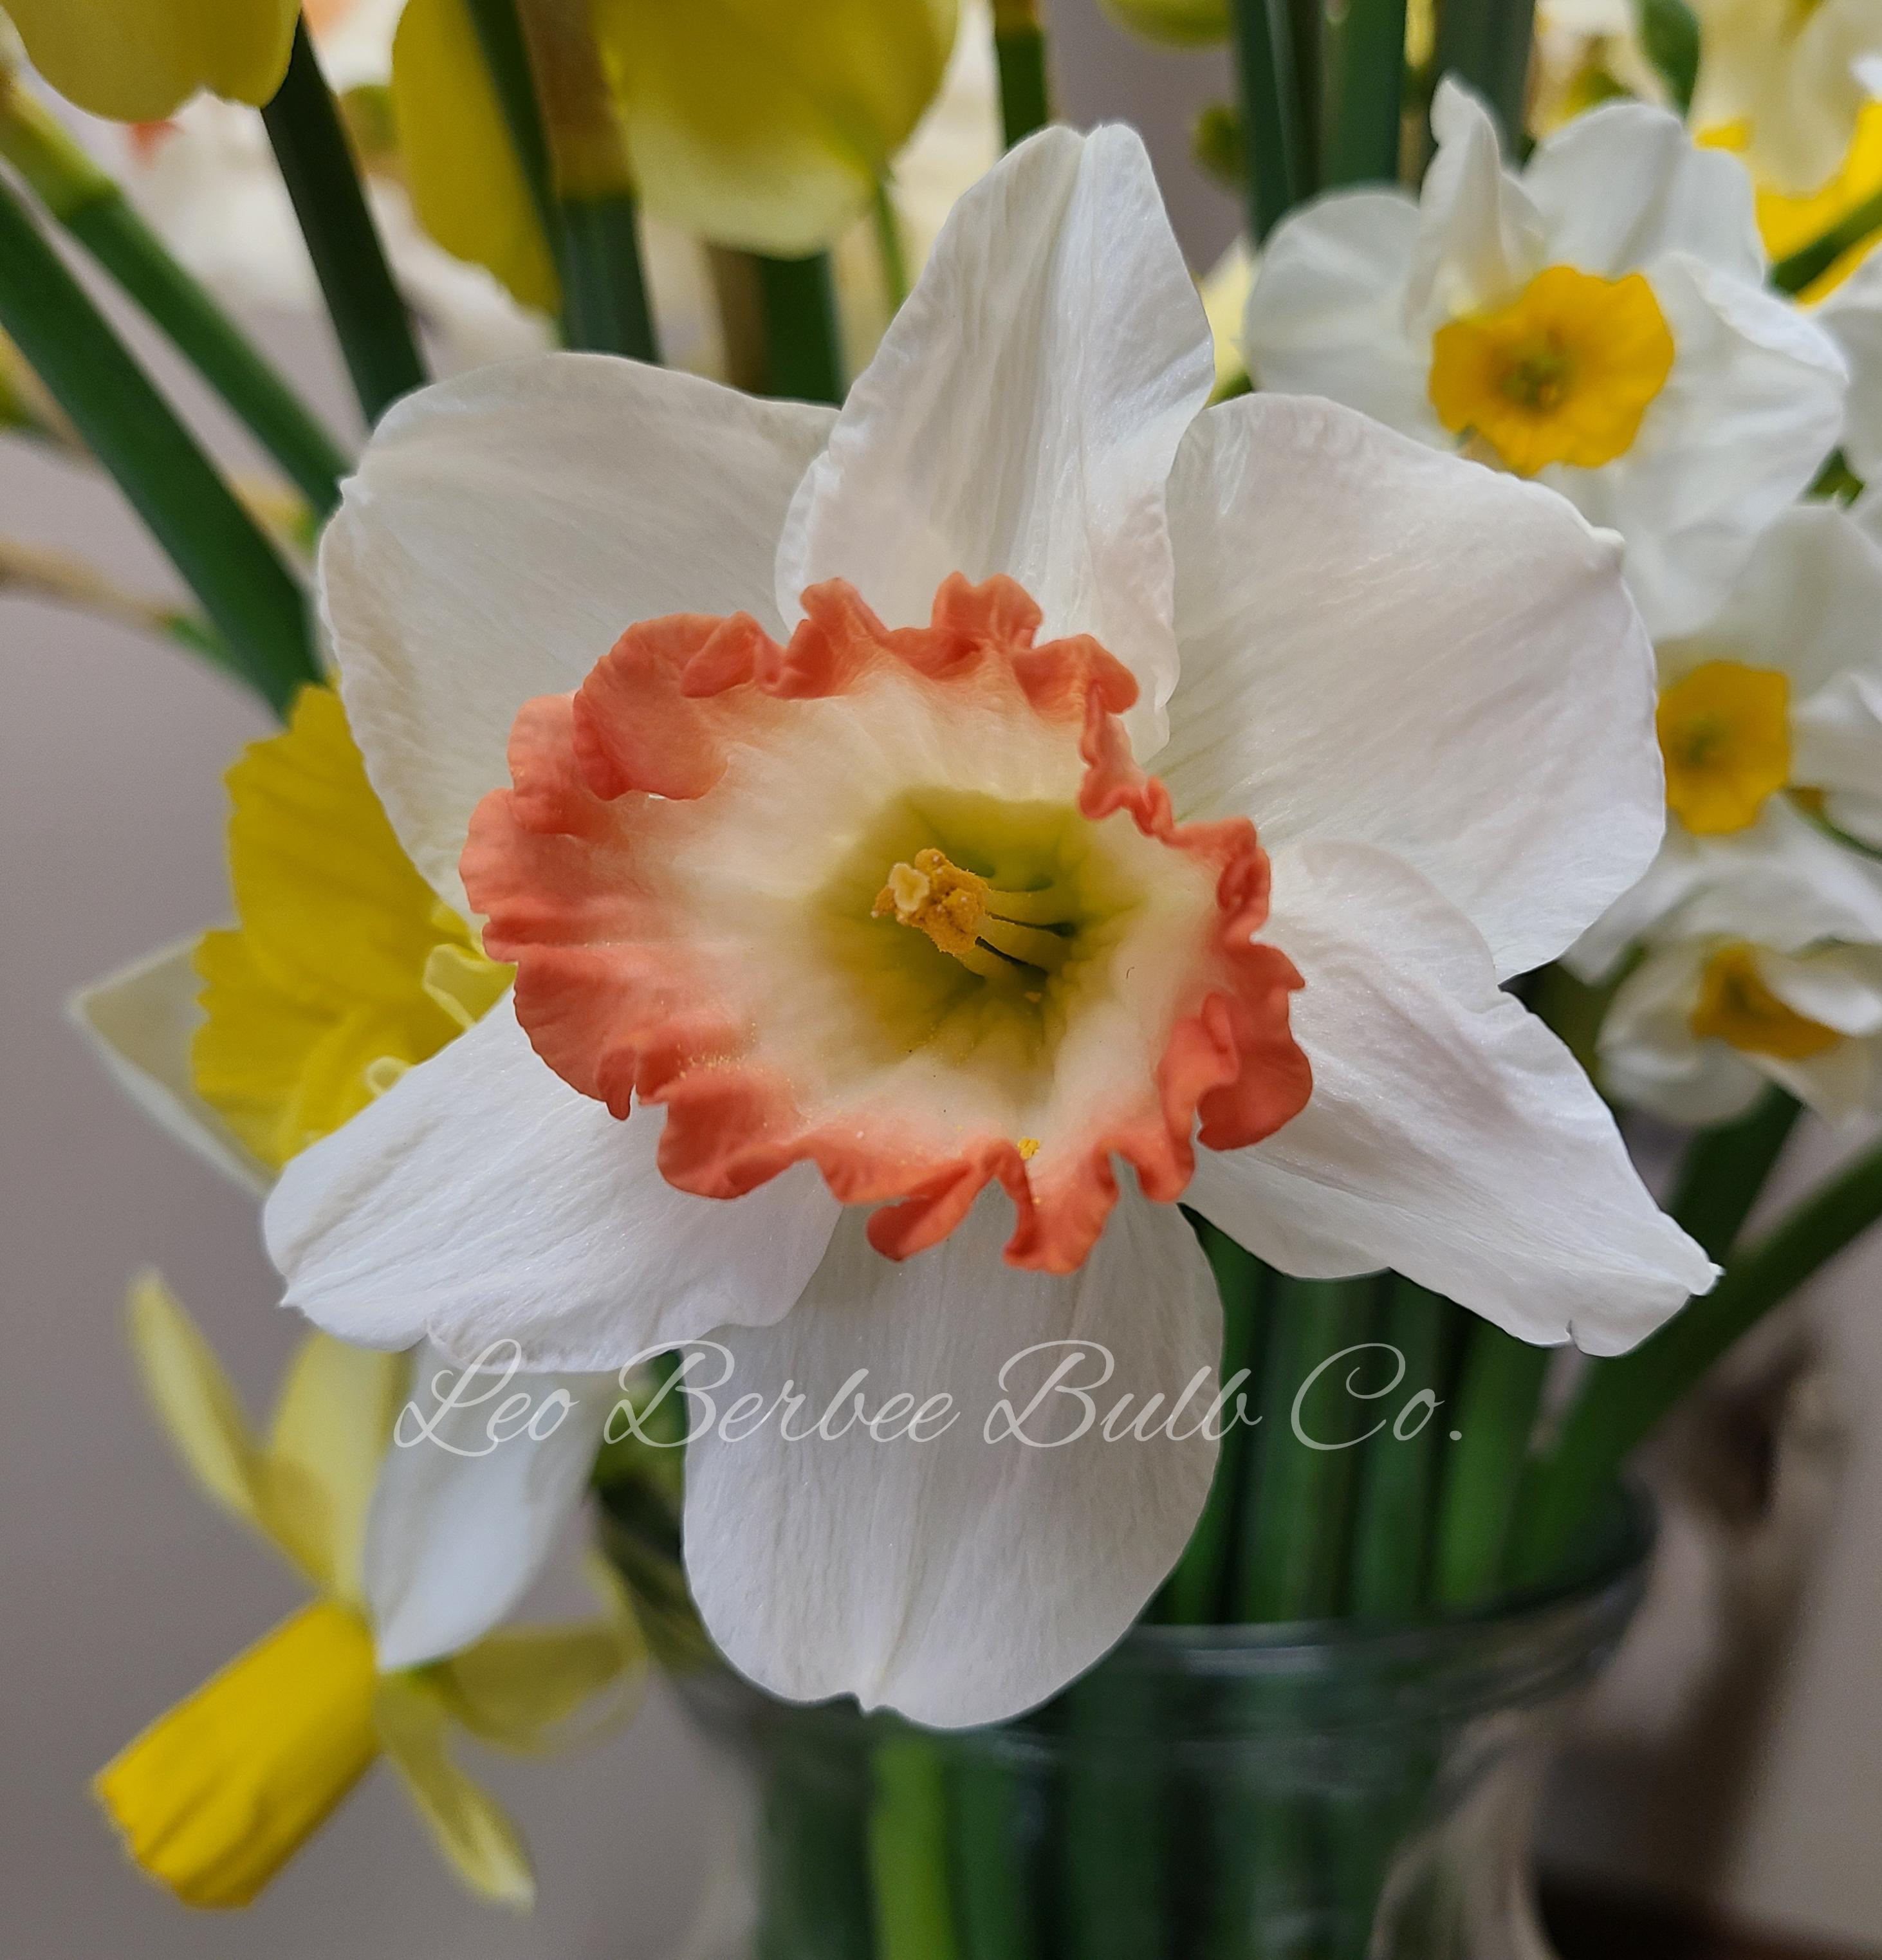 Daffodil Large Cupped 'Salome' - from Leo Berbee Bulb Company